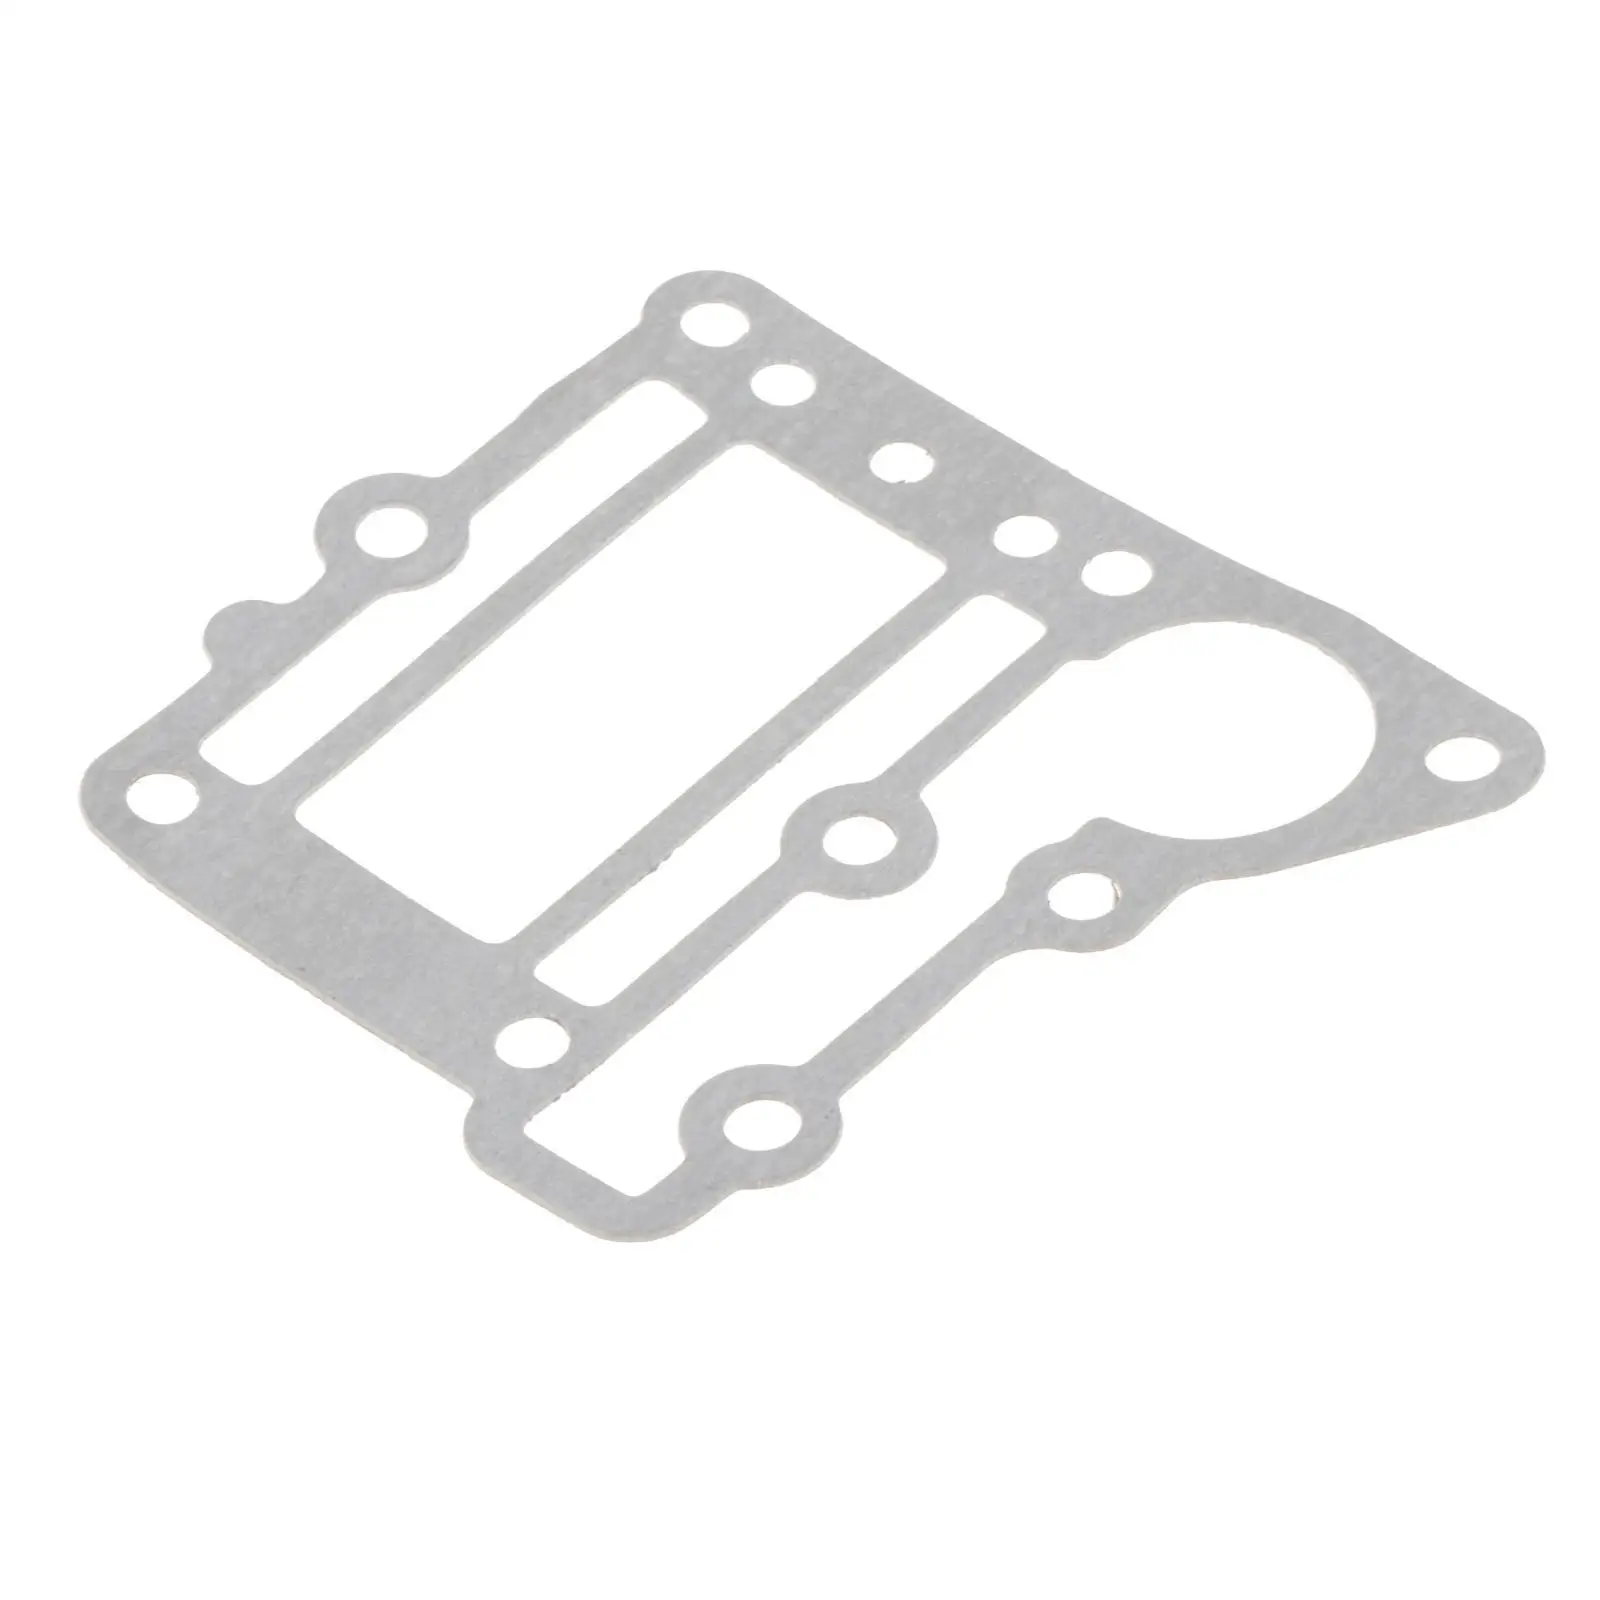 Gasket Outer Cover Outer Exhaust Gasket, 6E3-41114-A1 Fit for  5HP